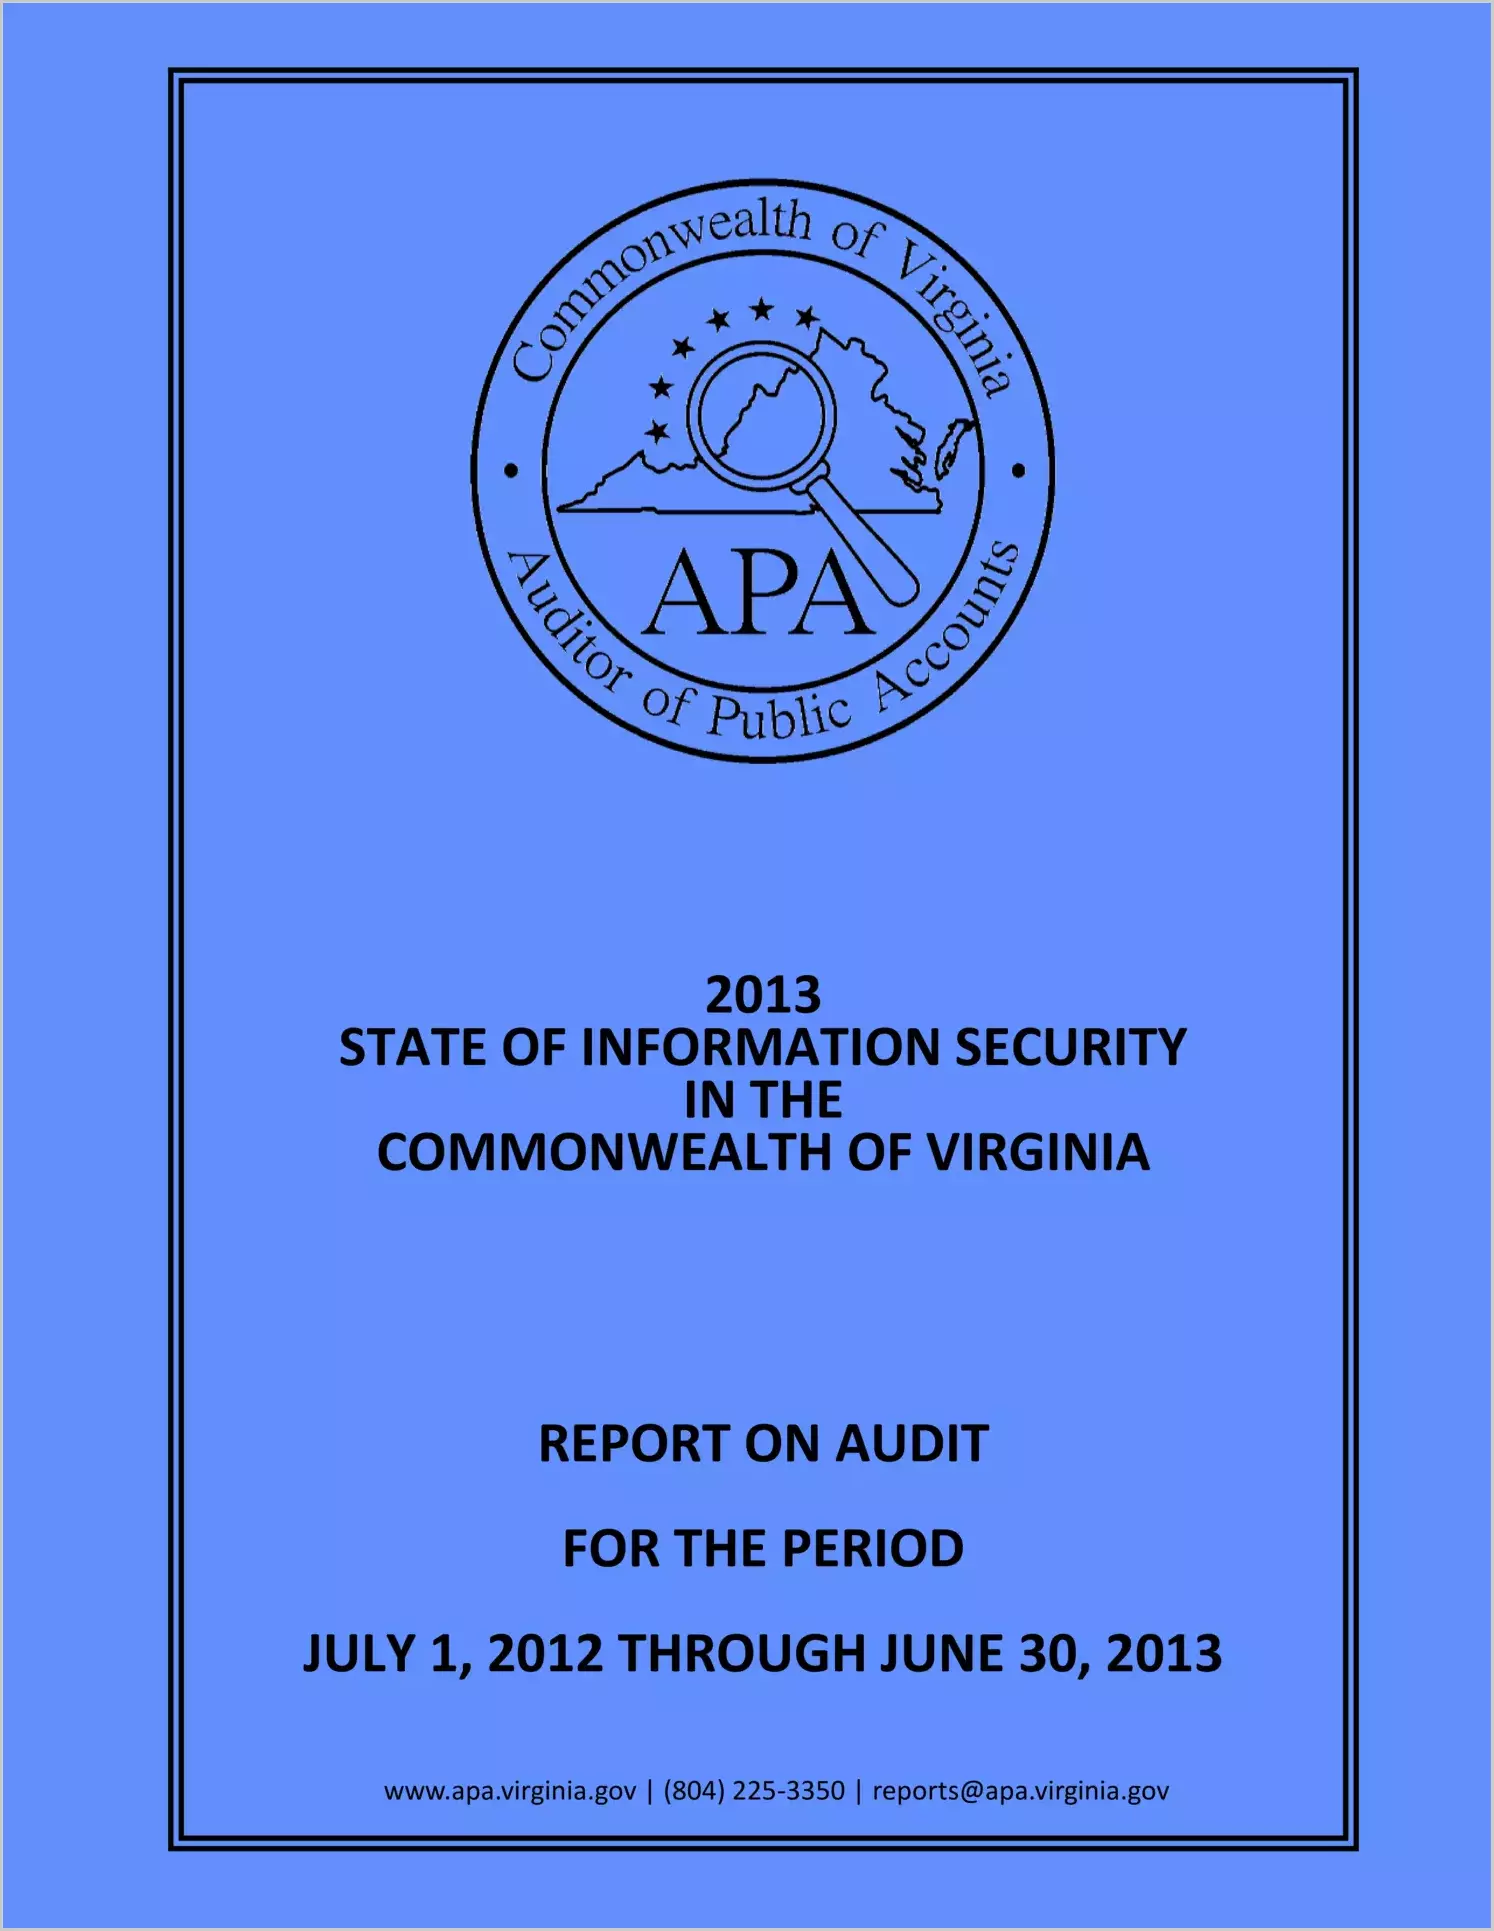 2013 State of Information Security in the Commonwealth of Virginia for the period July 1, 2012 thorugh June 30, 2013